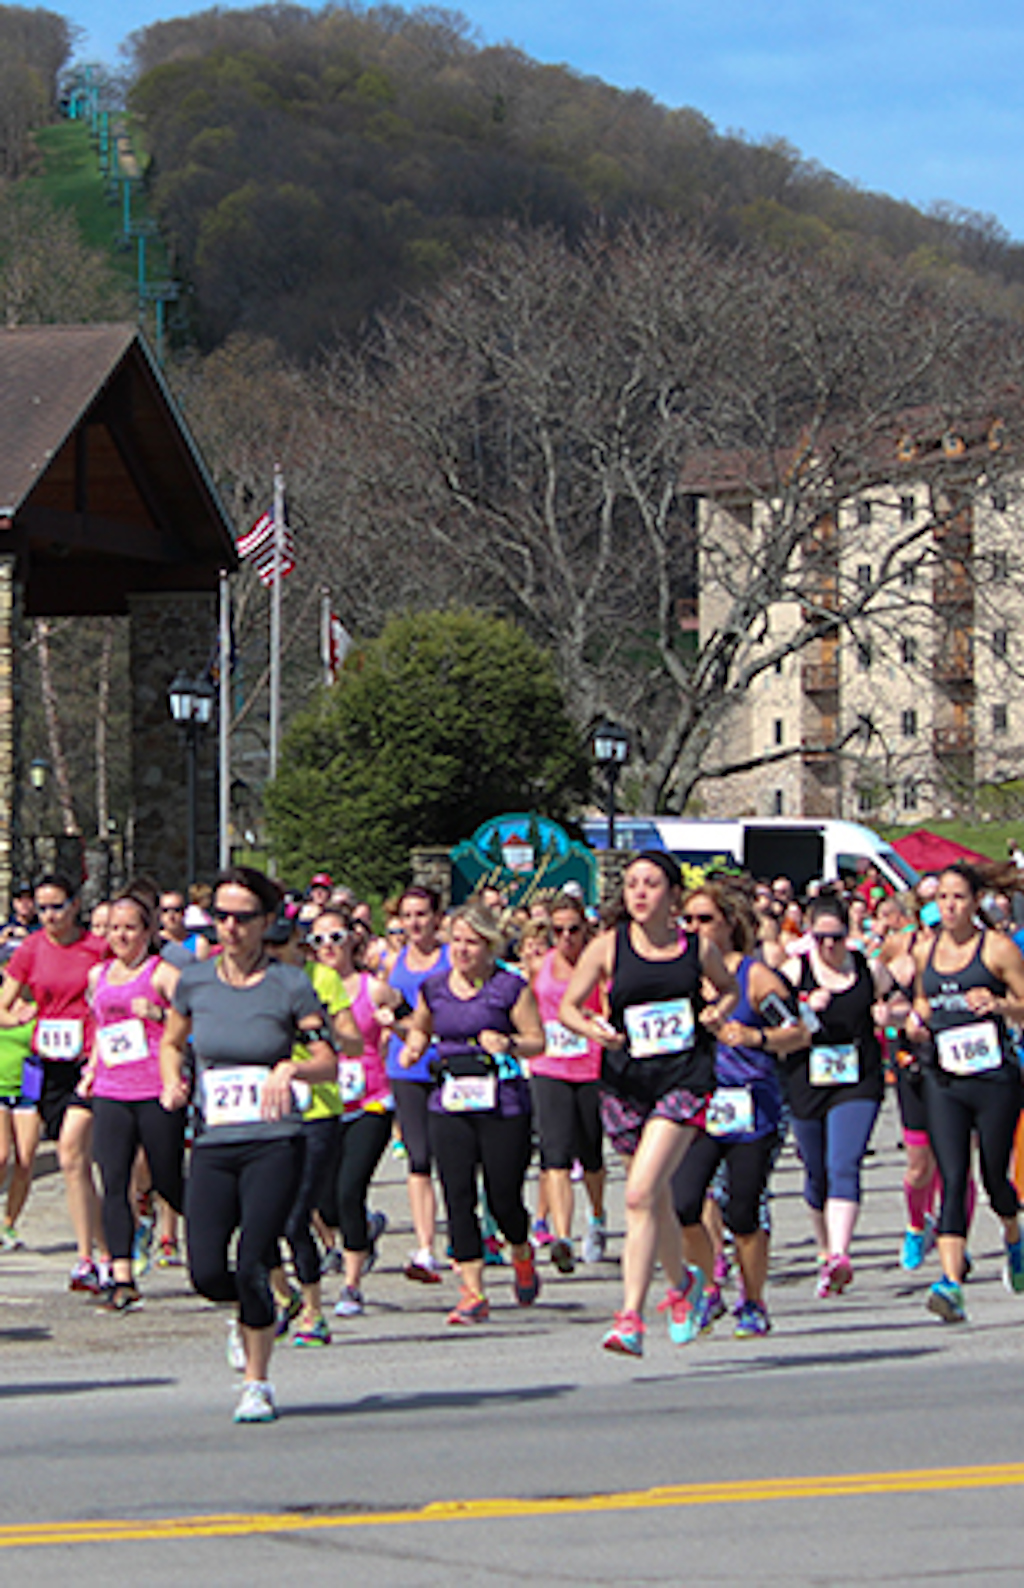 A large group of runners participating in the Happy Half Marathon.